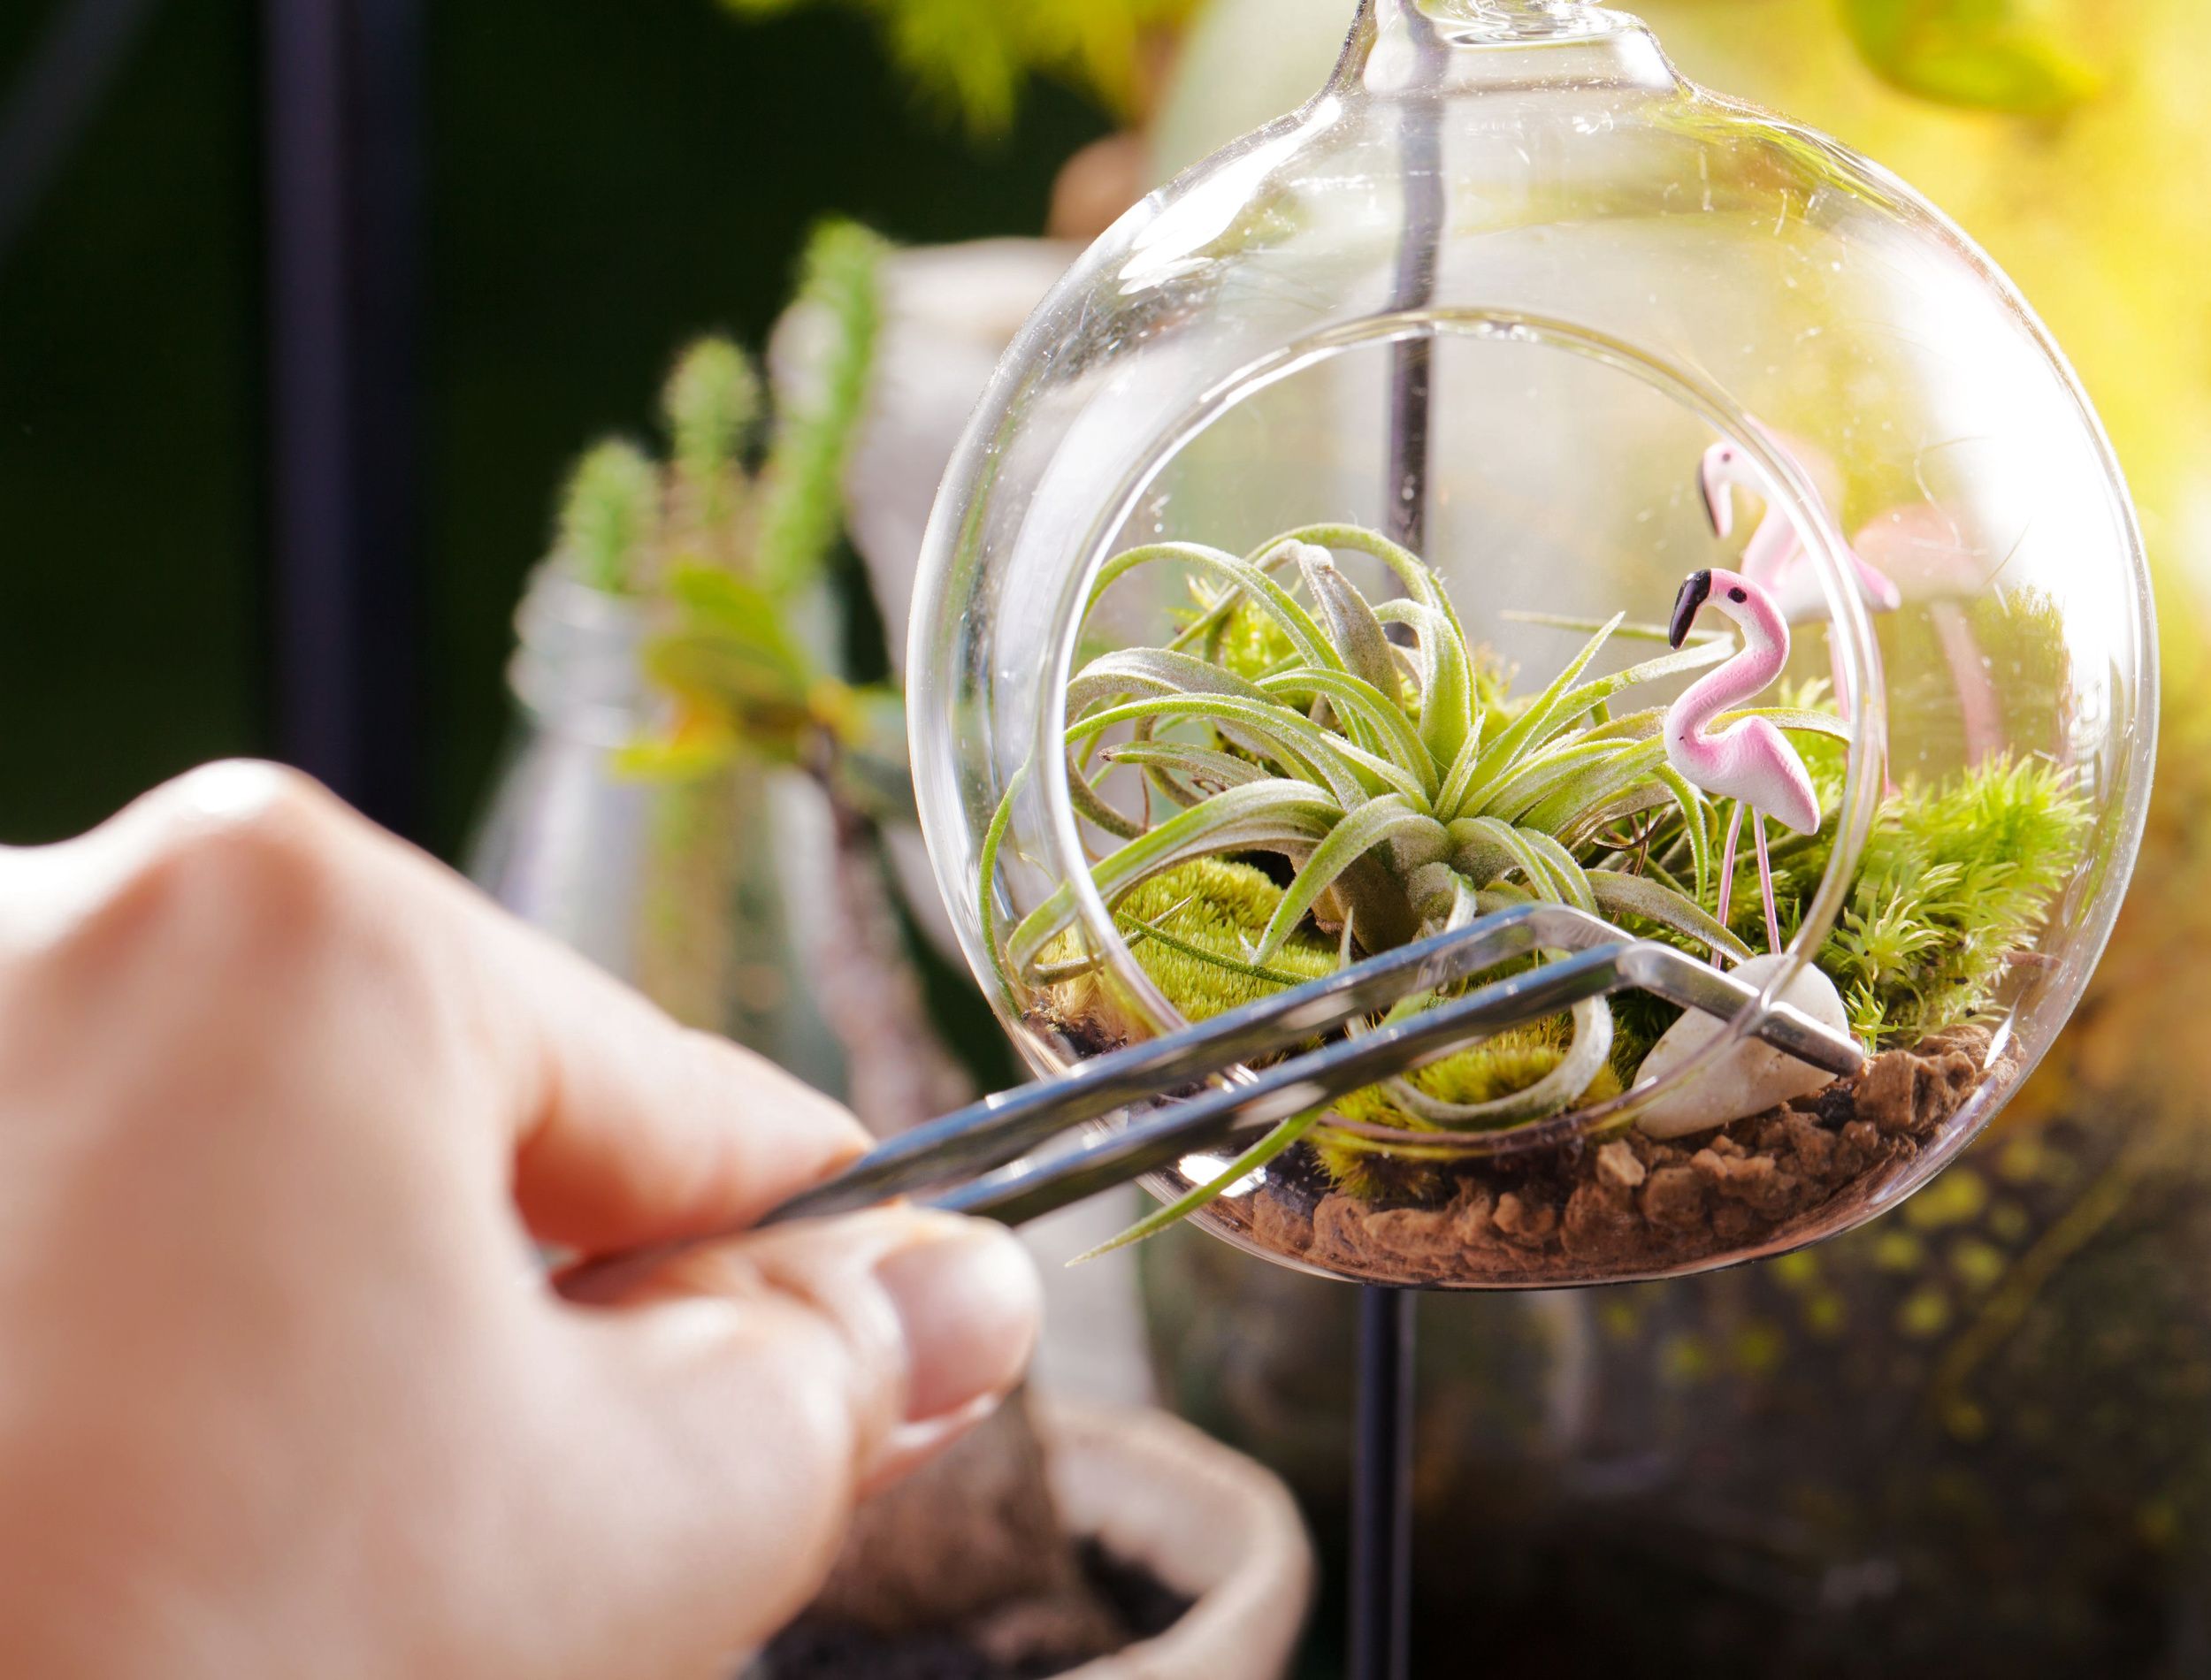 A terrarium garden scene in glass ball shape with Tillandsia, pebbles and flamingo toy inside and stainless forceps to decorate